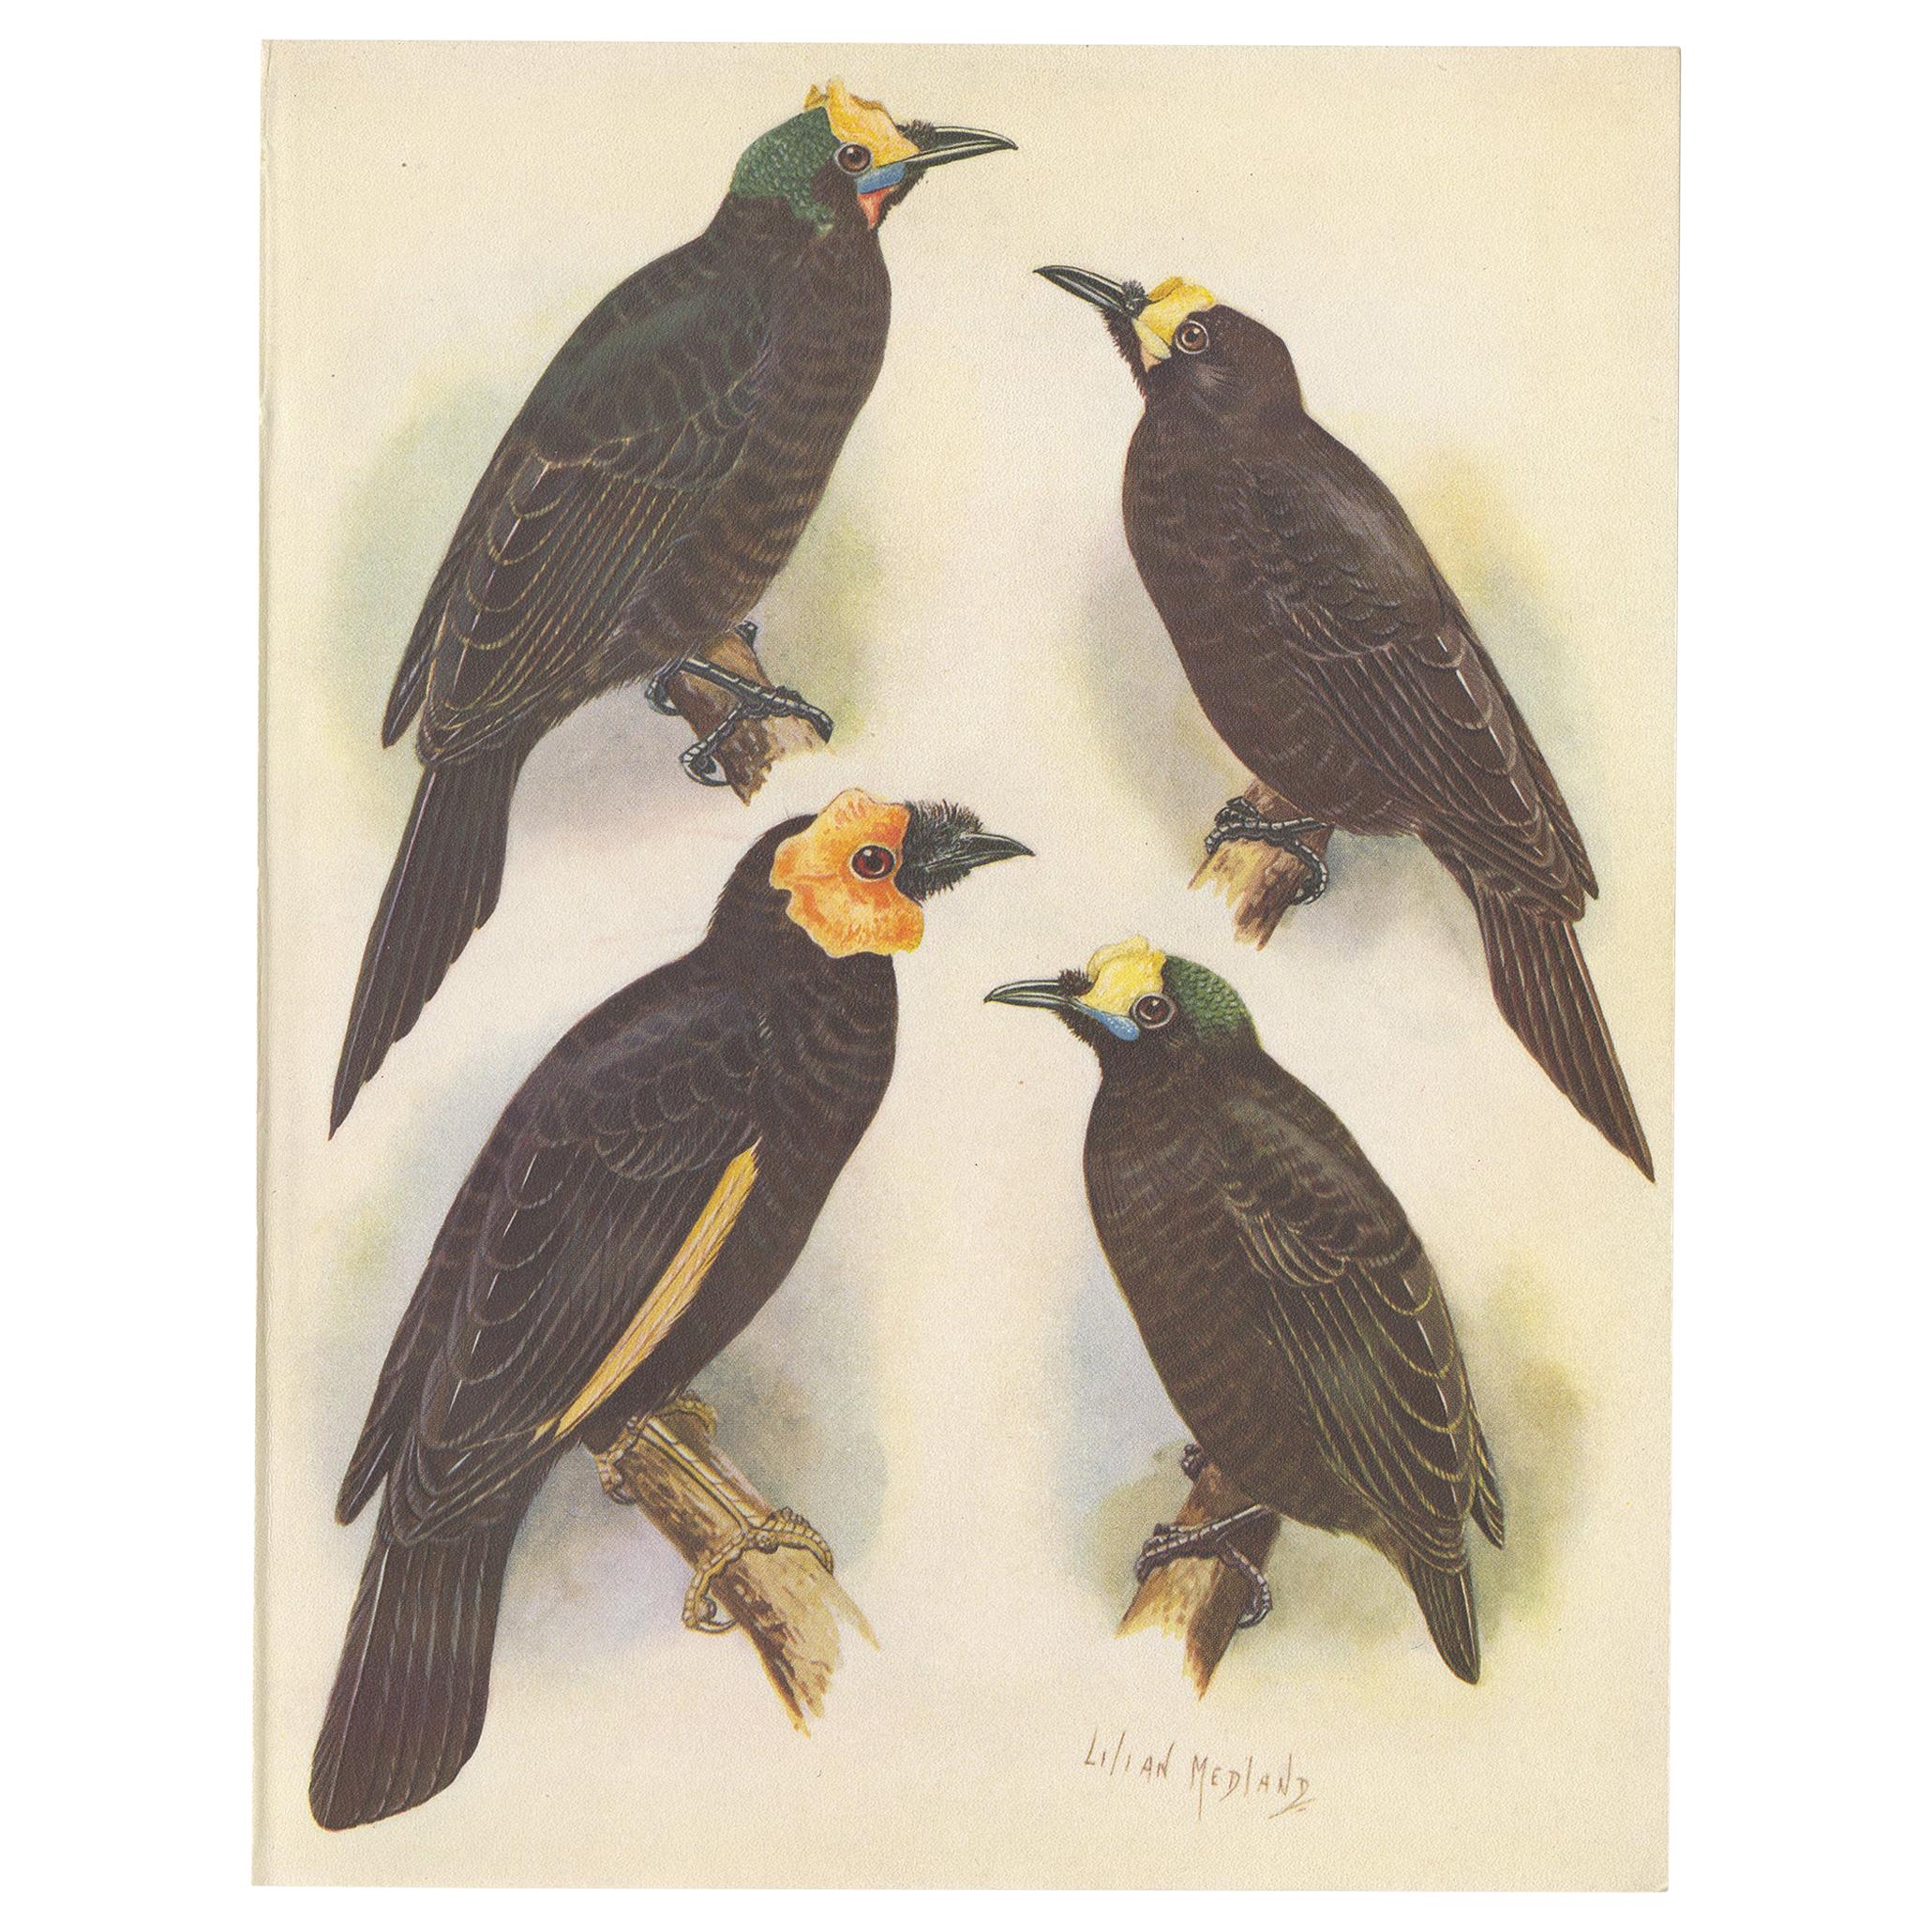 Antique Print of the Wattled Bird of Paradise and Others, 1950